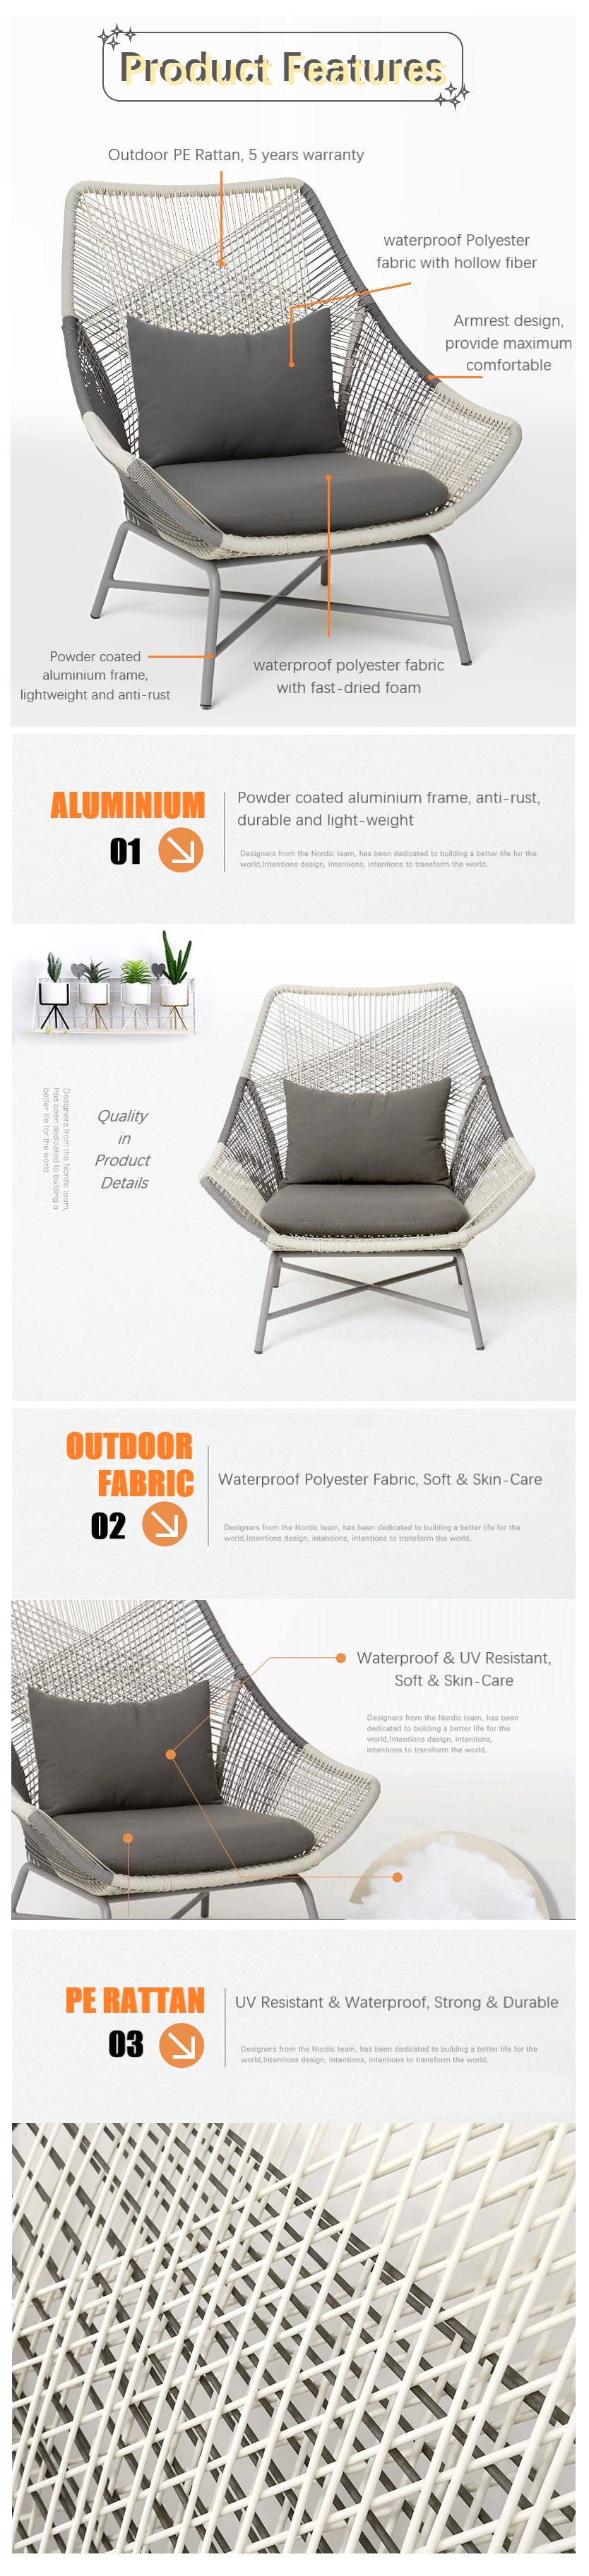 KF002 Outdoor Leisure Chair Product Details